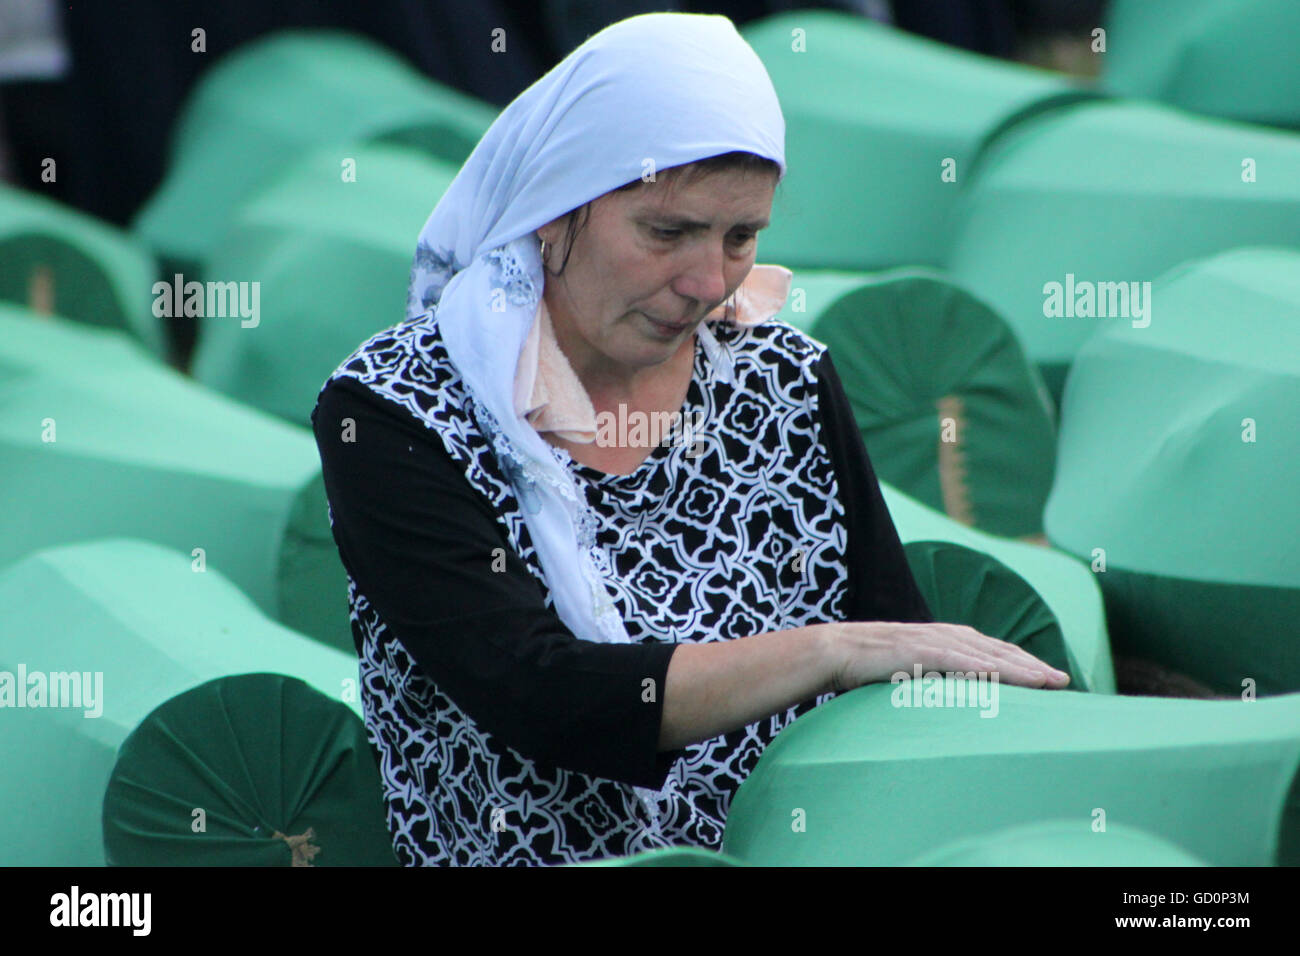 Potocari, Bosna i Hercegovina. 10th July, 2016. Women is seen crying next to the coffin of her relative. During the 1992-95 war, 8,000 Muslim men and boys were executed by Bosnian Serb forces over five July days. © Armin Durgut/ZUMA Wire/Alamy Live News Stock Photo